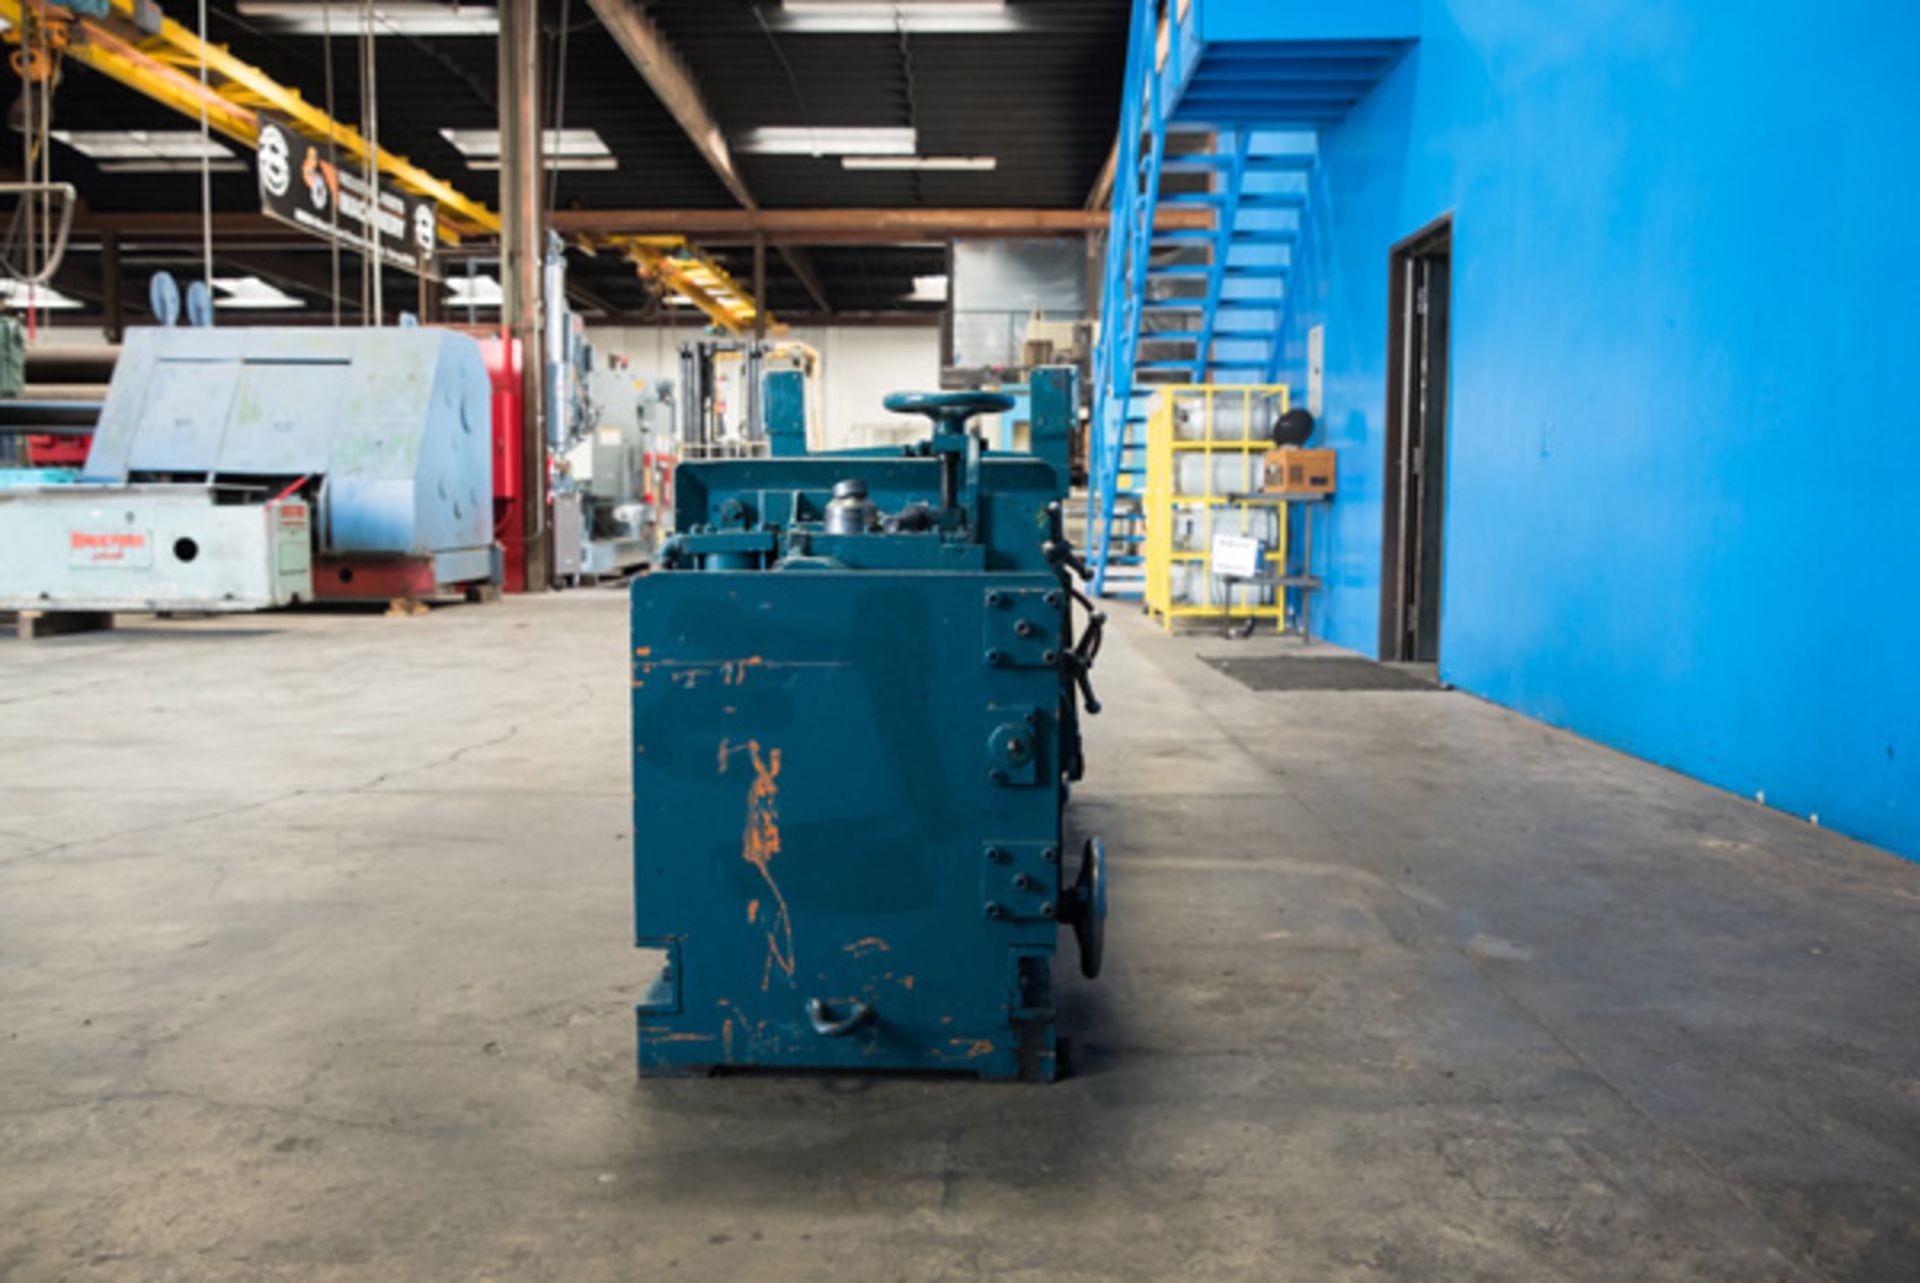 Dual End Can Bead Flanging Machine, Located In: Huntington Park, CA - 7181 - Image 3 of 14